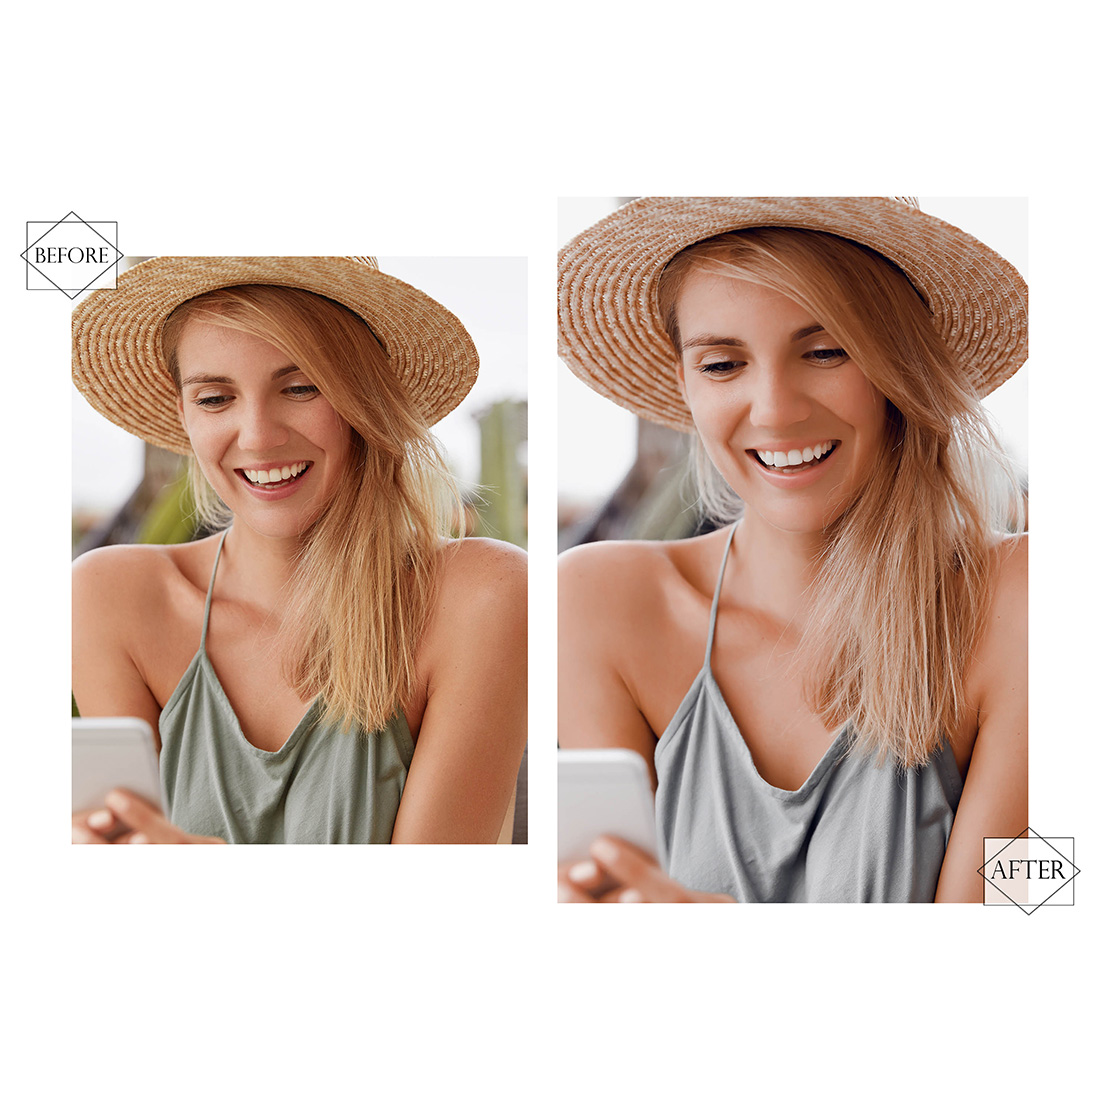 12 Photoshop Actions, Olive Green Ps Action, Nature ACR Preset, Avocado Airy Filter, Lifestyle Theme For Instagram, Coastline Offshore, Bronze portrait preview image.